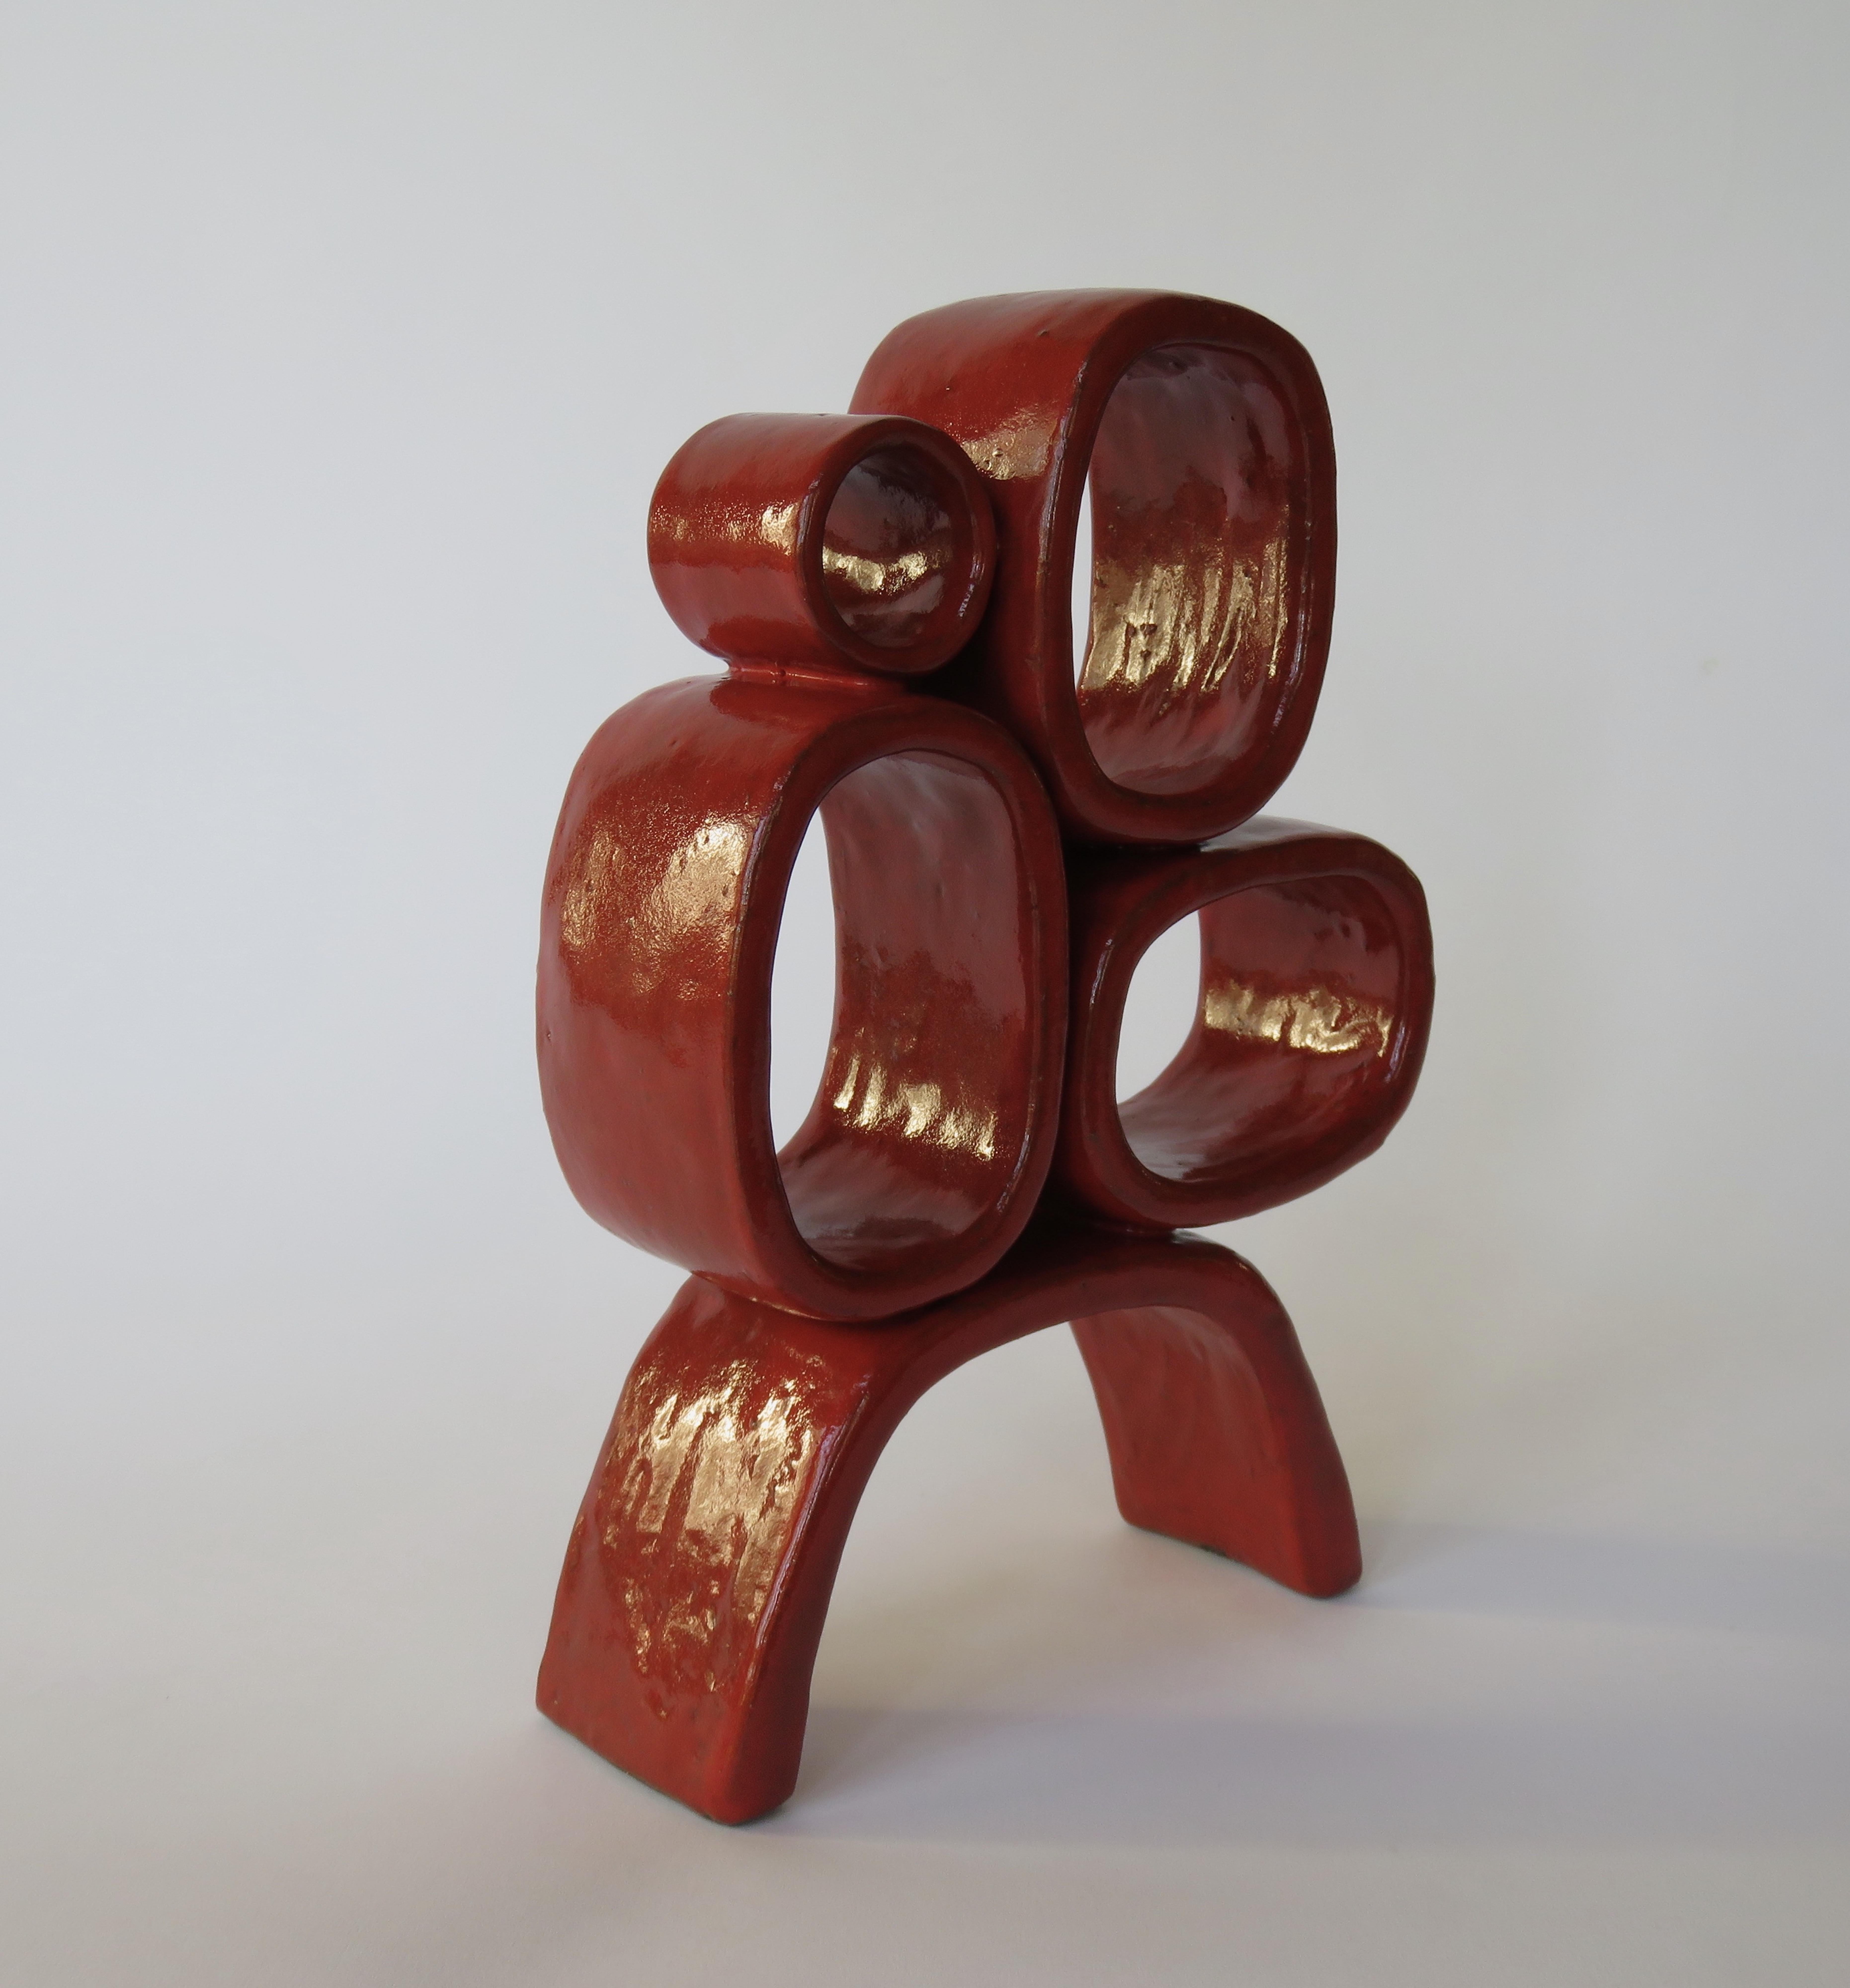 American Four Red Rings on Angled Legs TOTEM, Glazed Hand Built Ceramic Stoneware